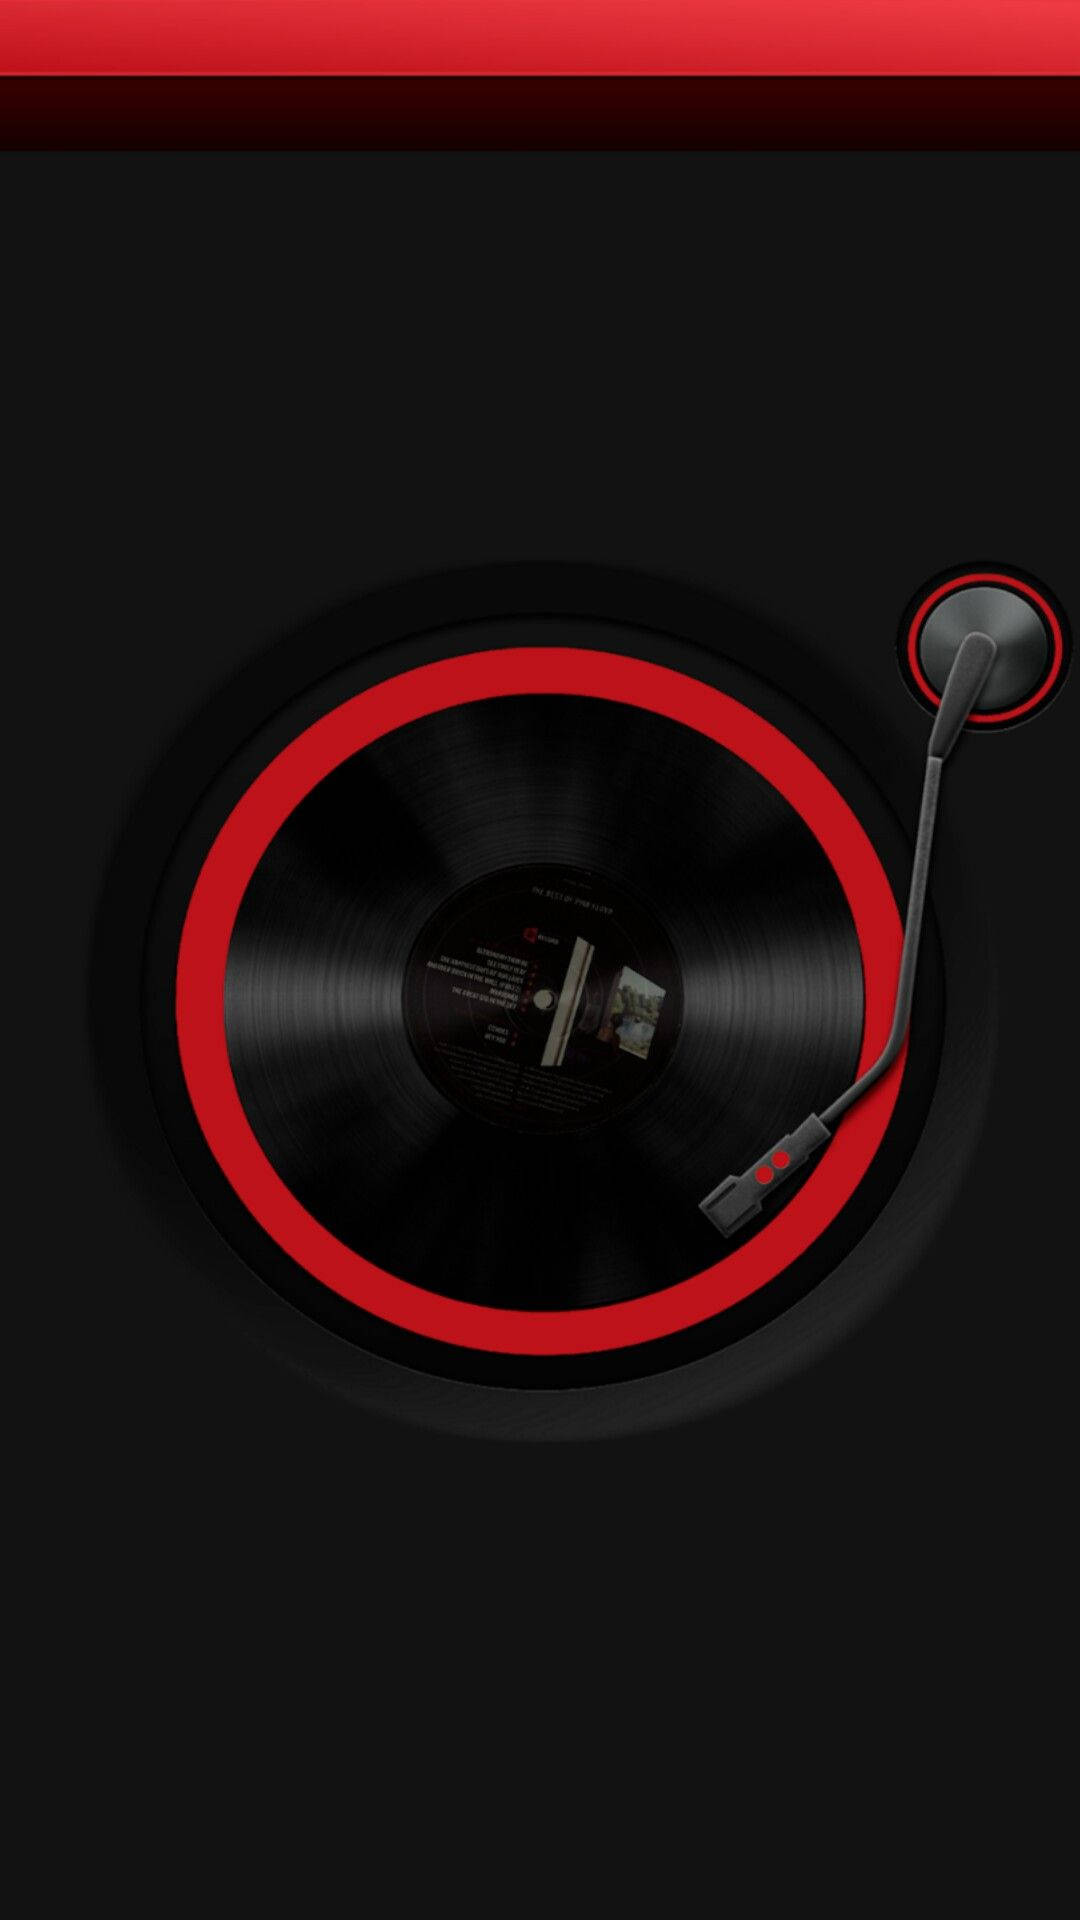 Caption: A Vinyl Record Spinning on a Music Phone Turntable Wallpaper